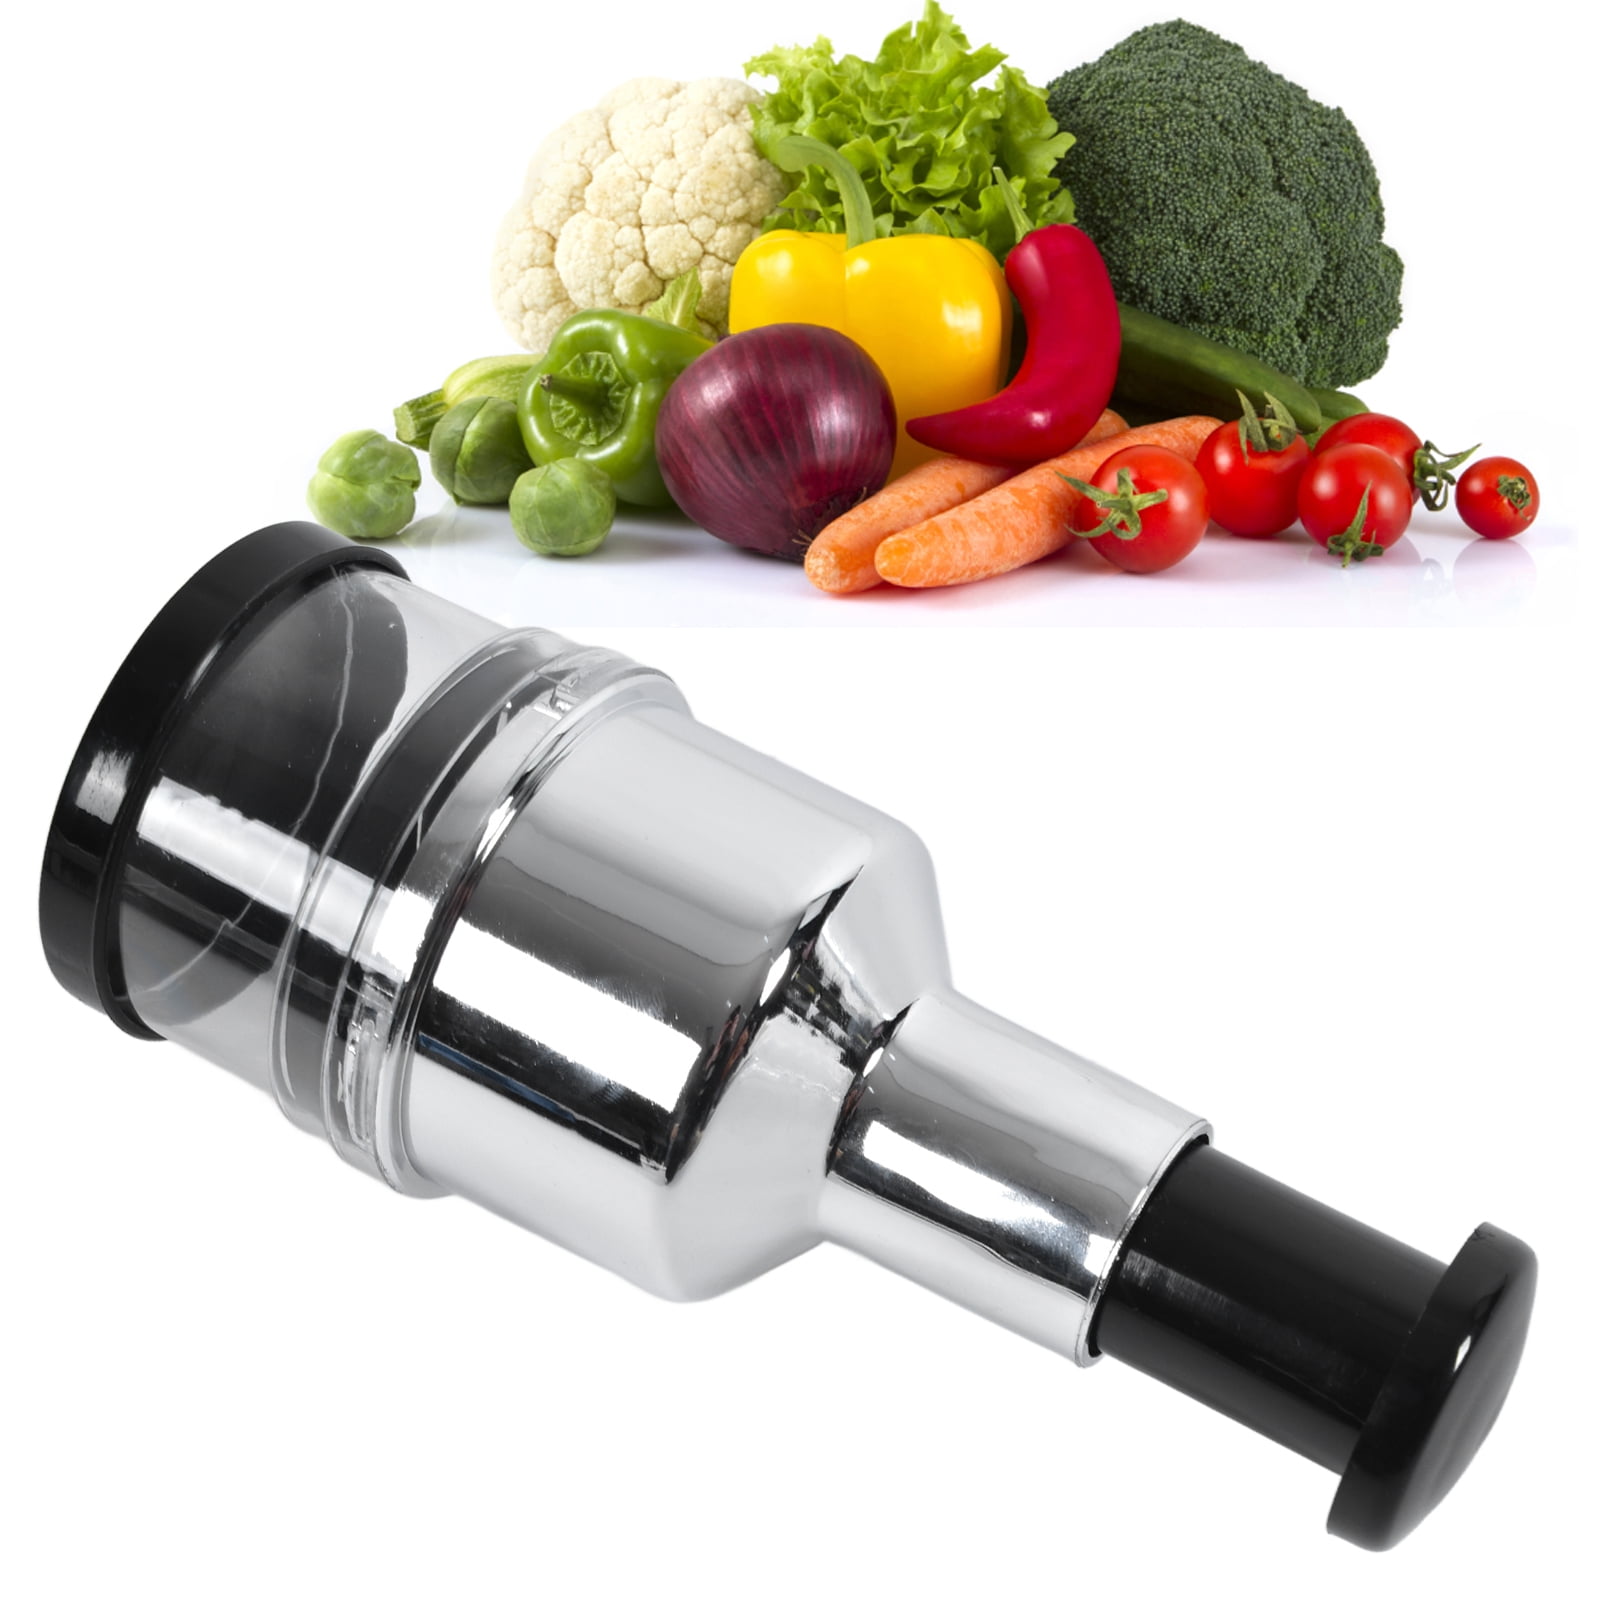 CNKOO Food Chopper, Manual Handheld Kitchen Slicer with Stainless Steel  ZigZag Blade-One Piece Salad Vegetable Chopper and Slicer-Manual Mini Hand  Chopper-Onion, Garlic 